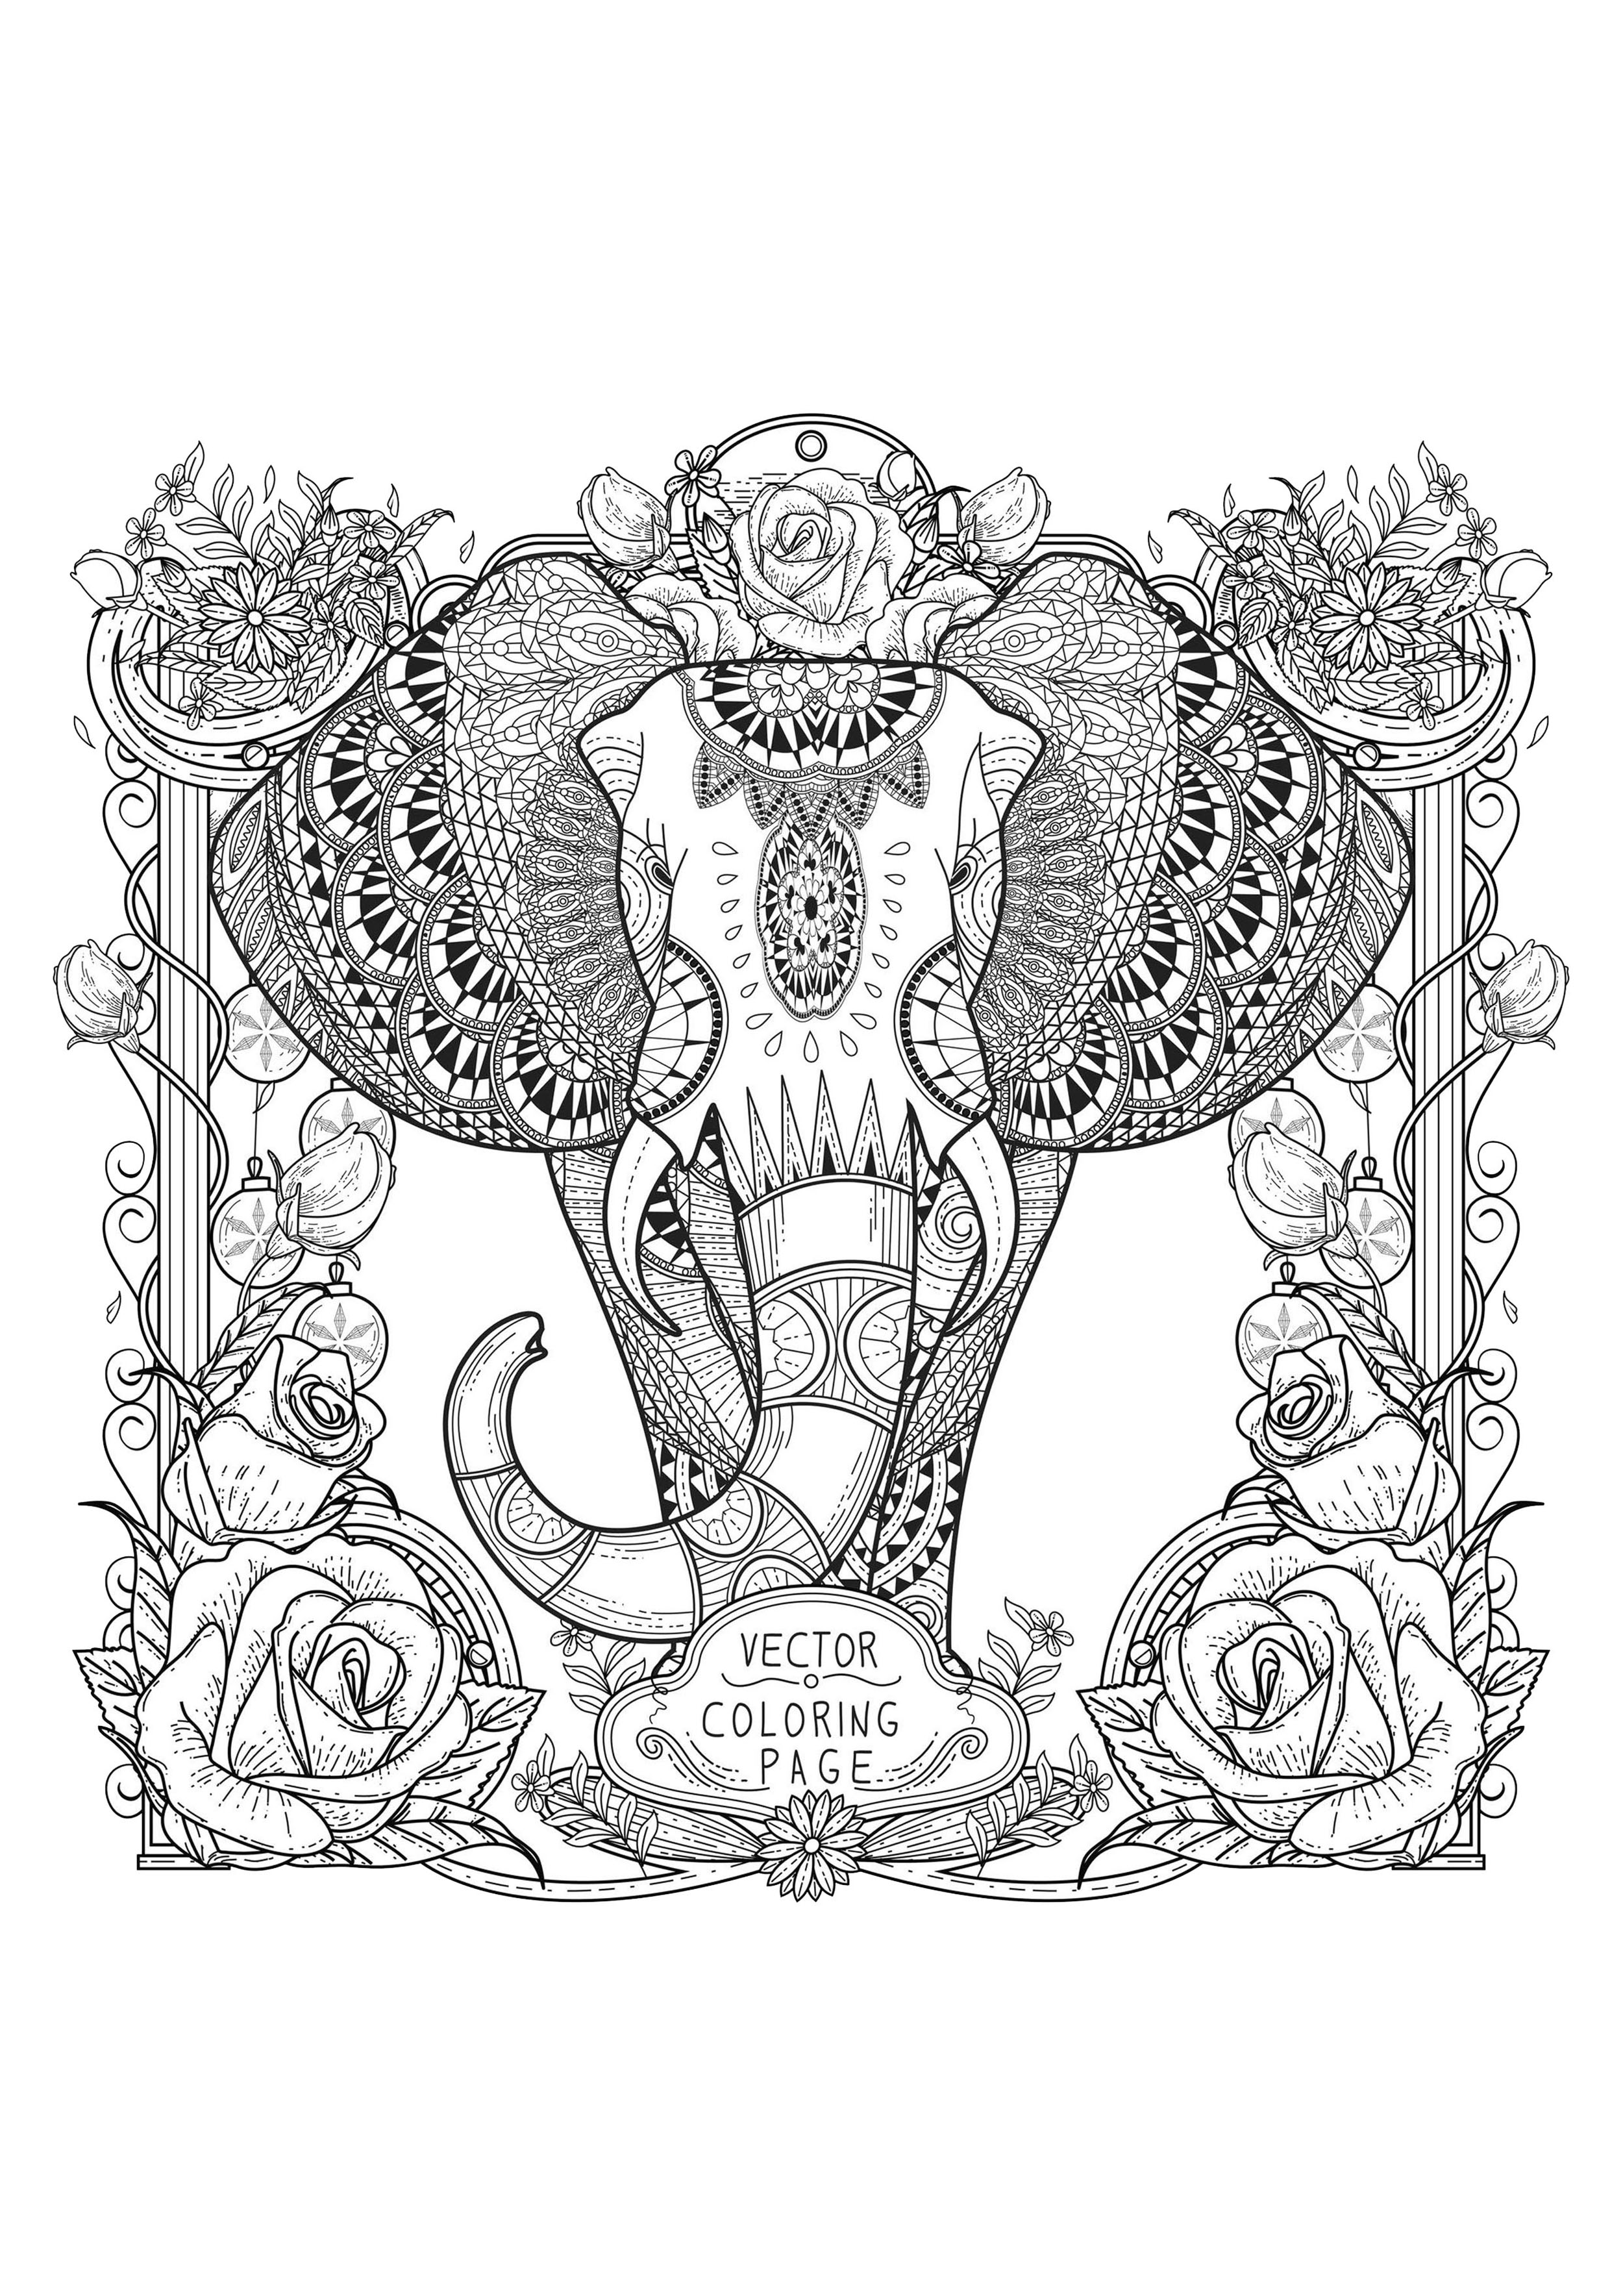 Huge Elephant and beautiful designs and complex illustrated border, Artist : Kchung